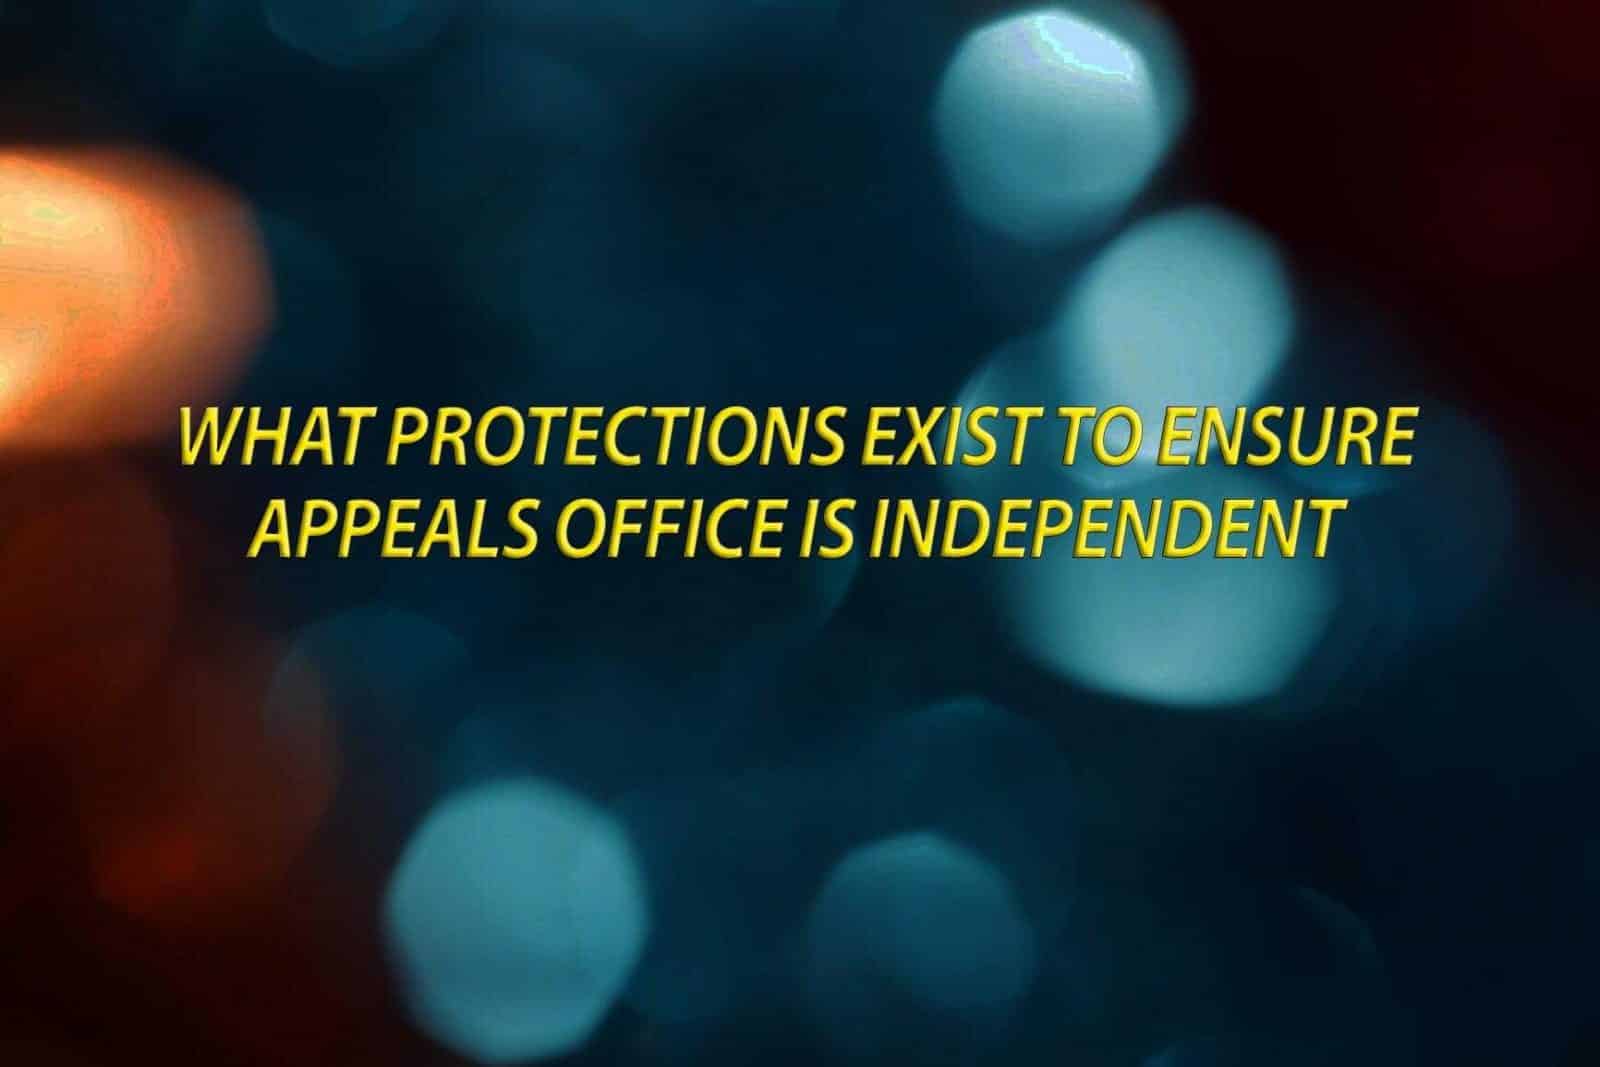 What protections exist to ensure appeals office is independent